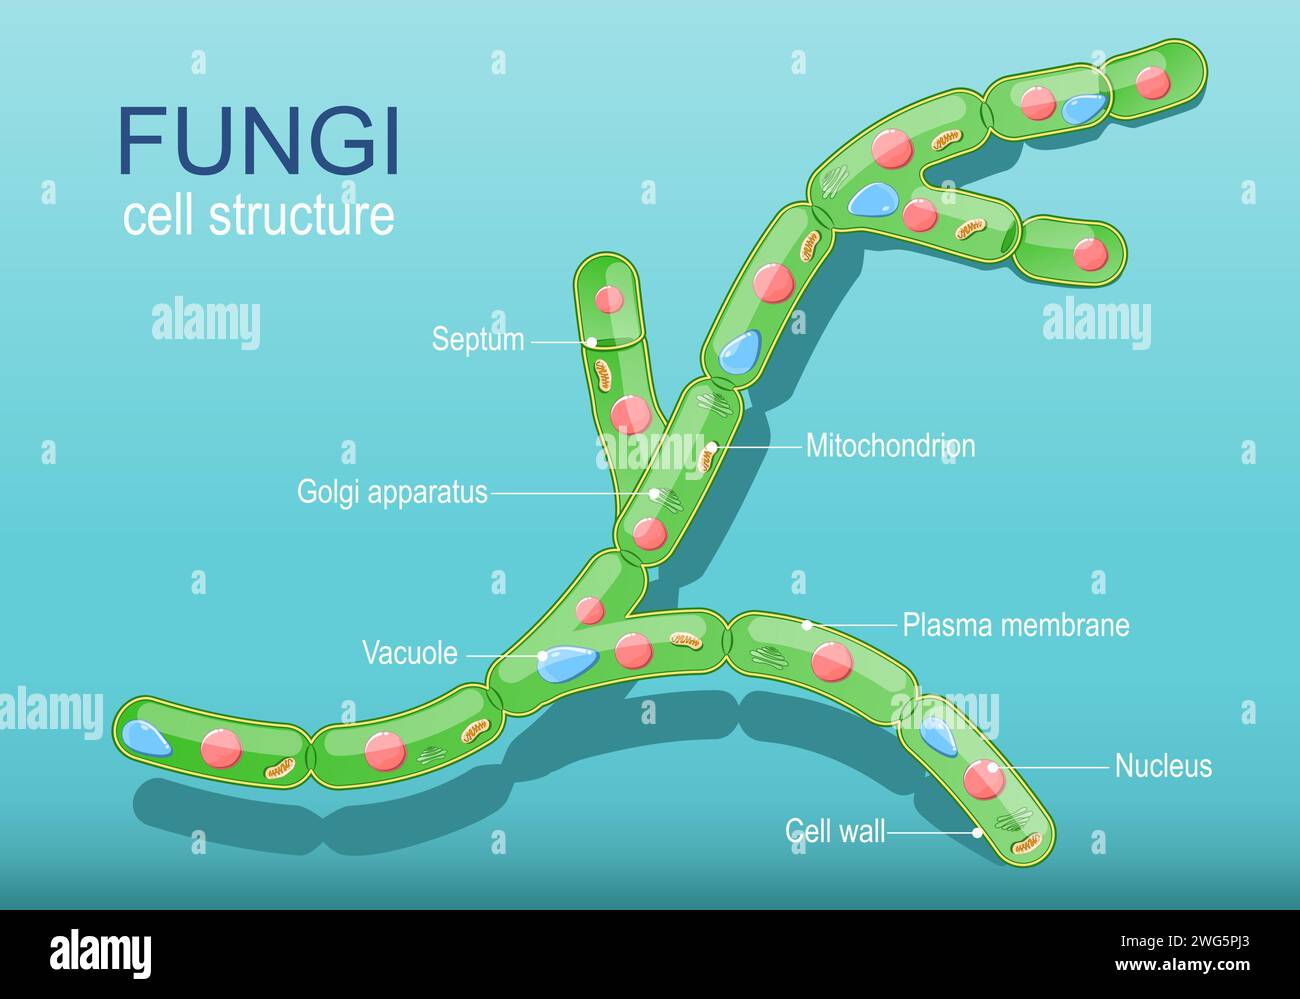 Anatomy of typical fungi cell. Fungal Hyphae and Cell Structure. Vector diagram Stock Vector